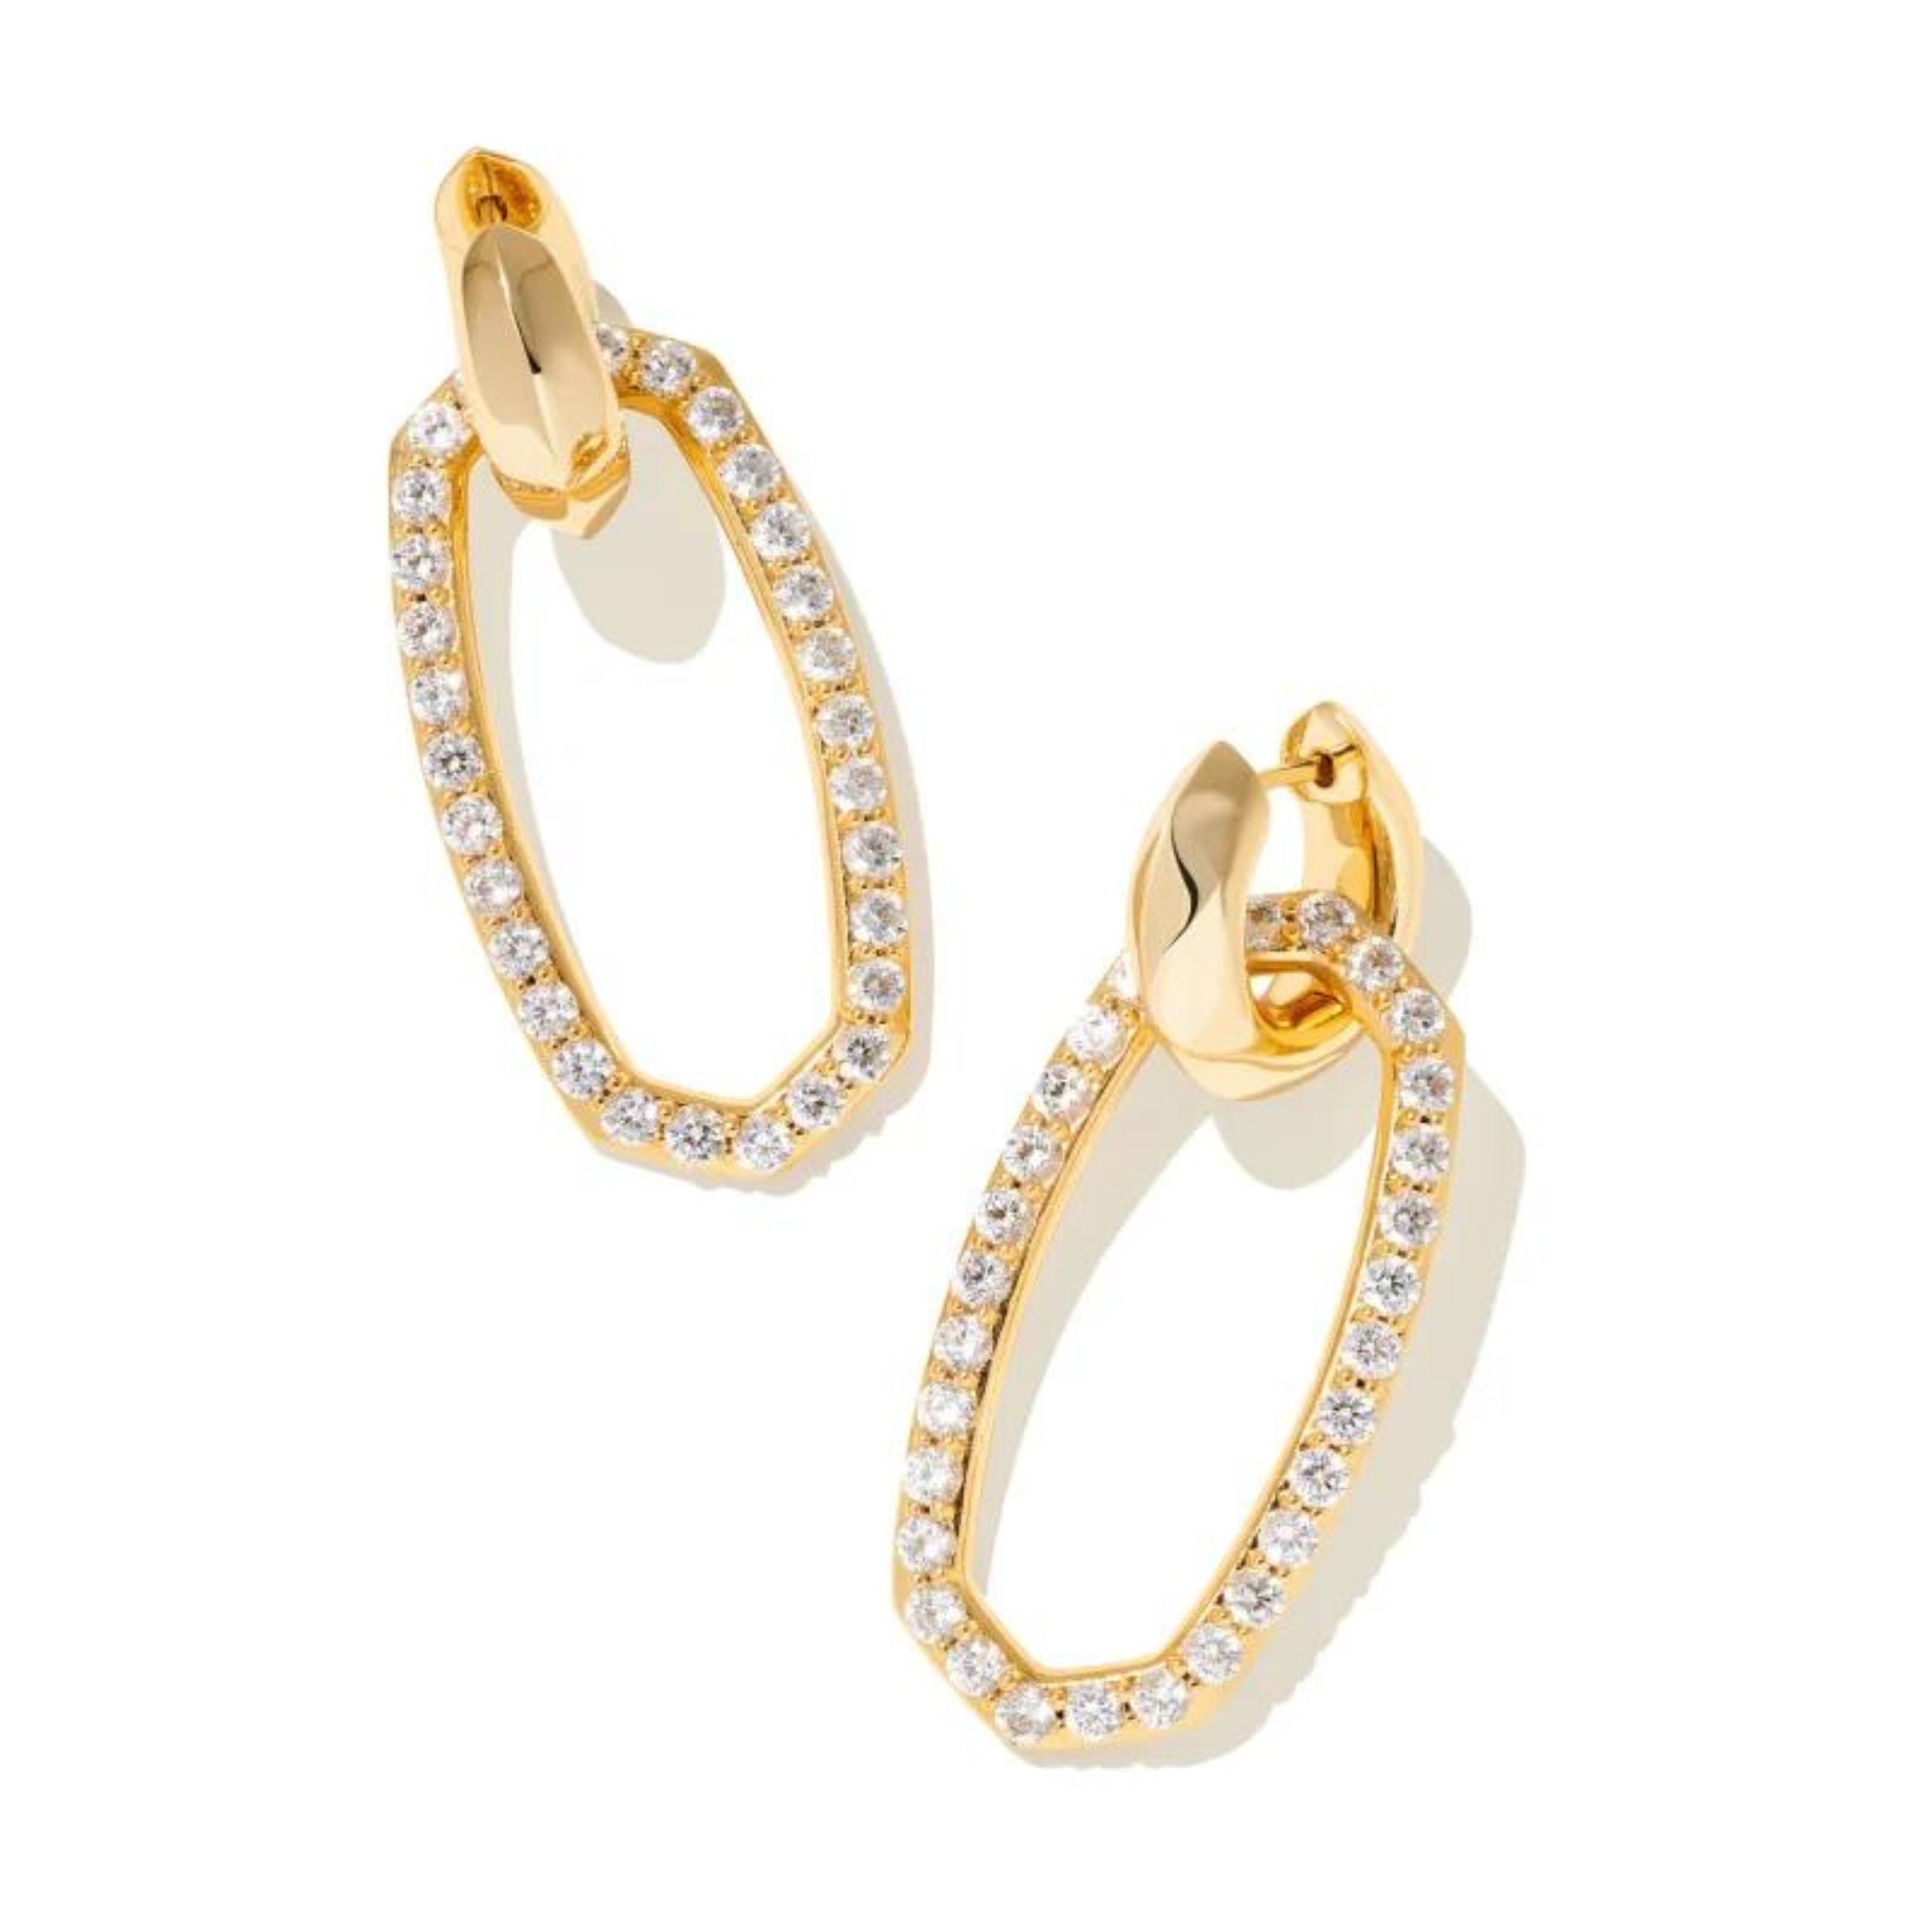 Gold hoop dangle earrings with white crystals pictured on a white background.